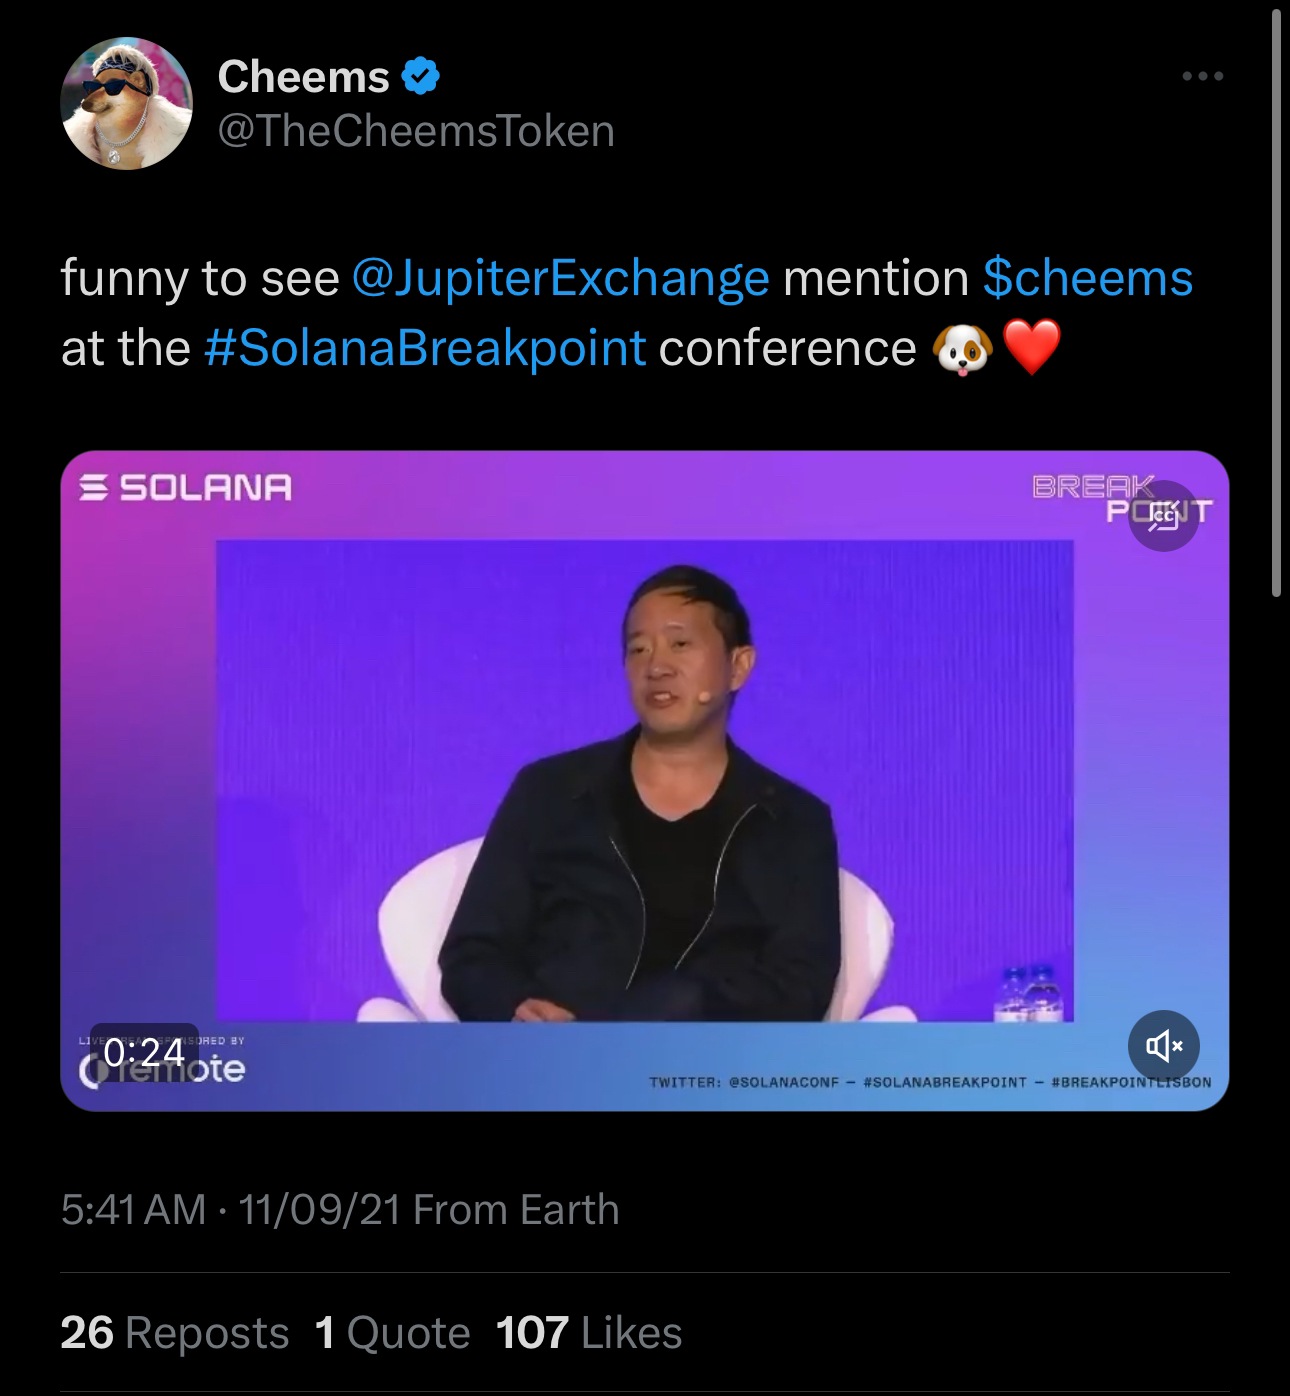 Jupiter was created because of cheems (lol)